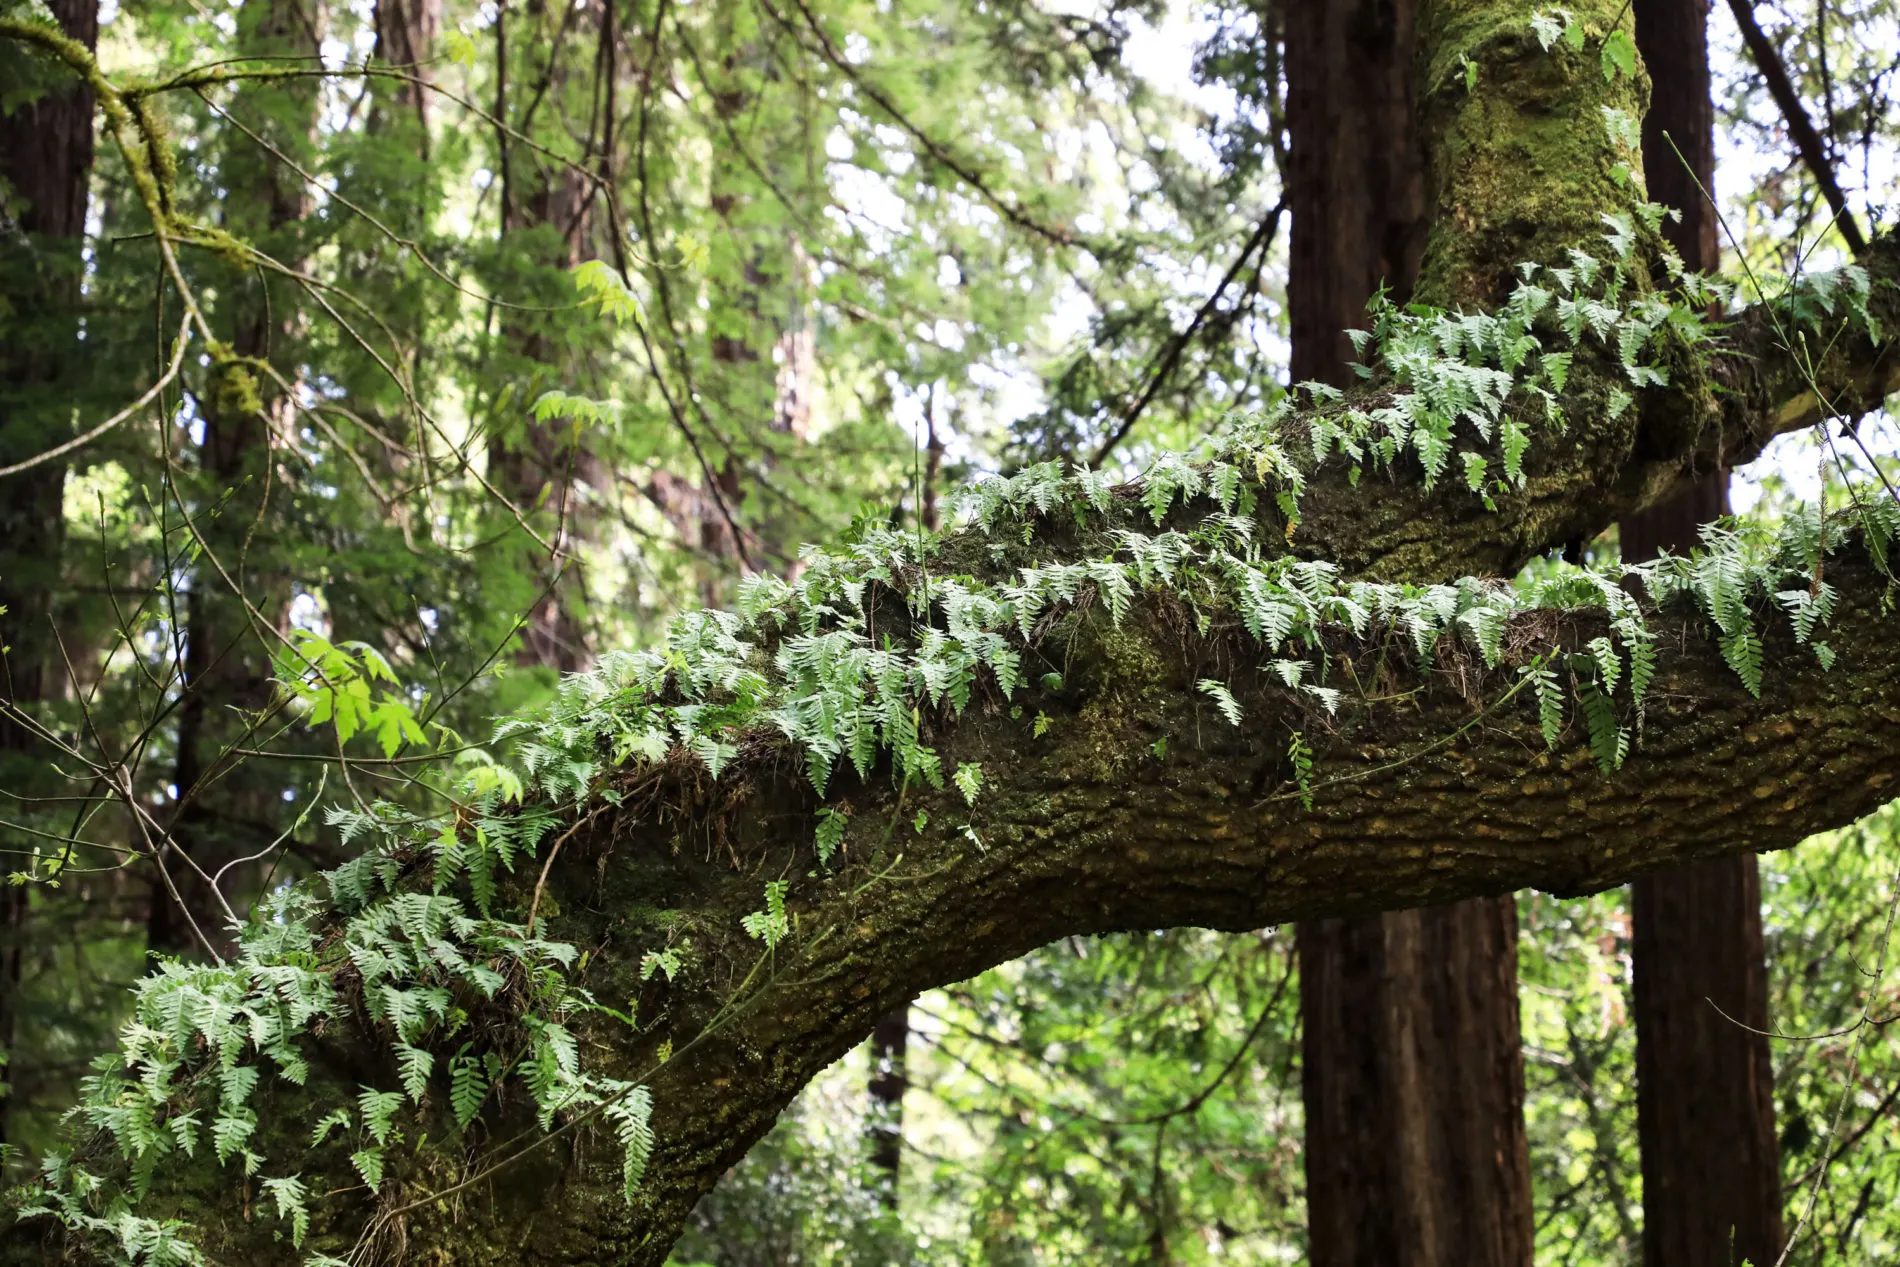 Moss and ferns growing on the tree limbs in Muir Woods National Monument.